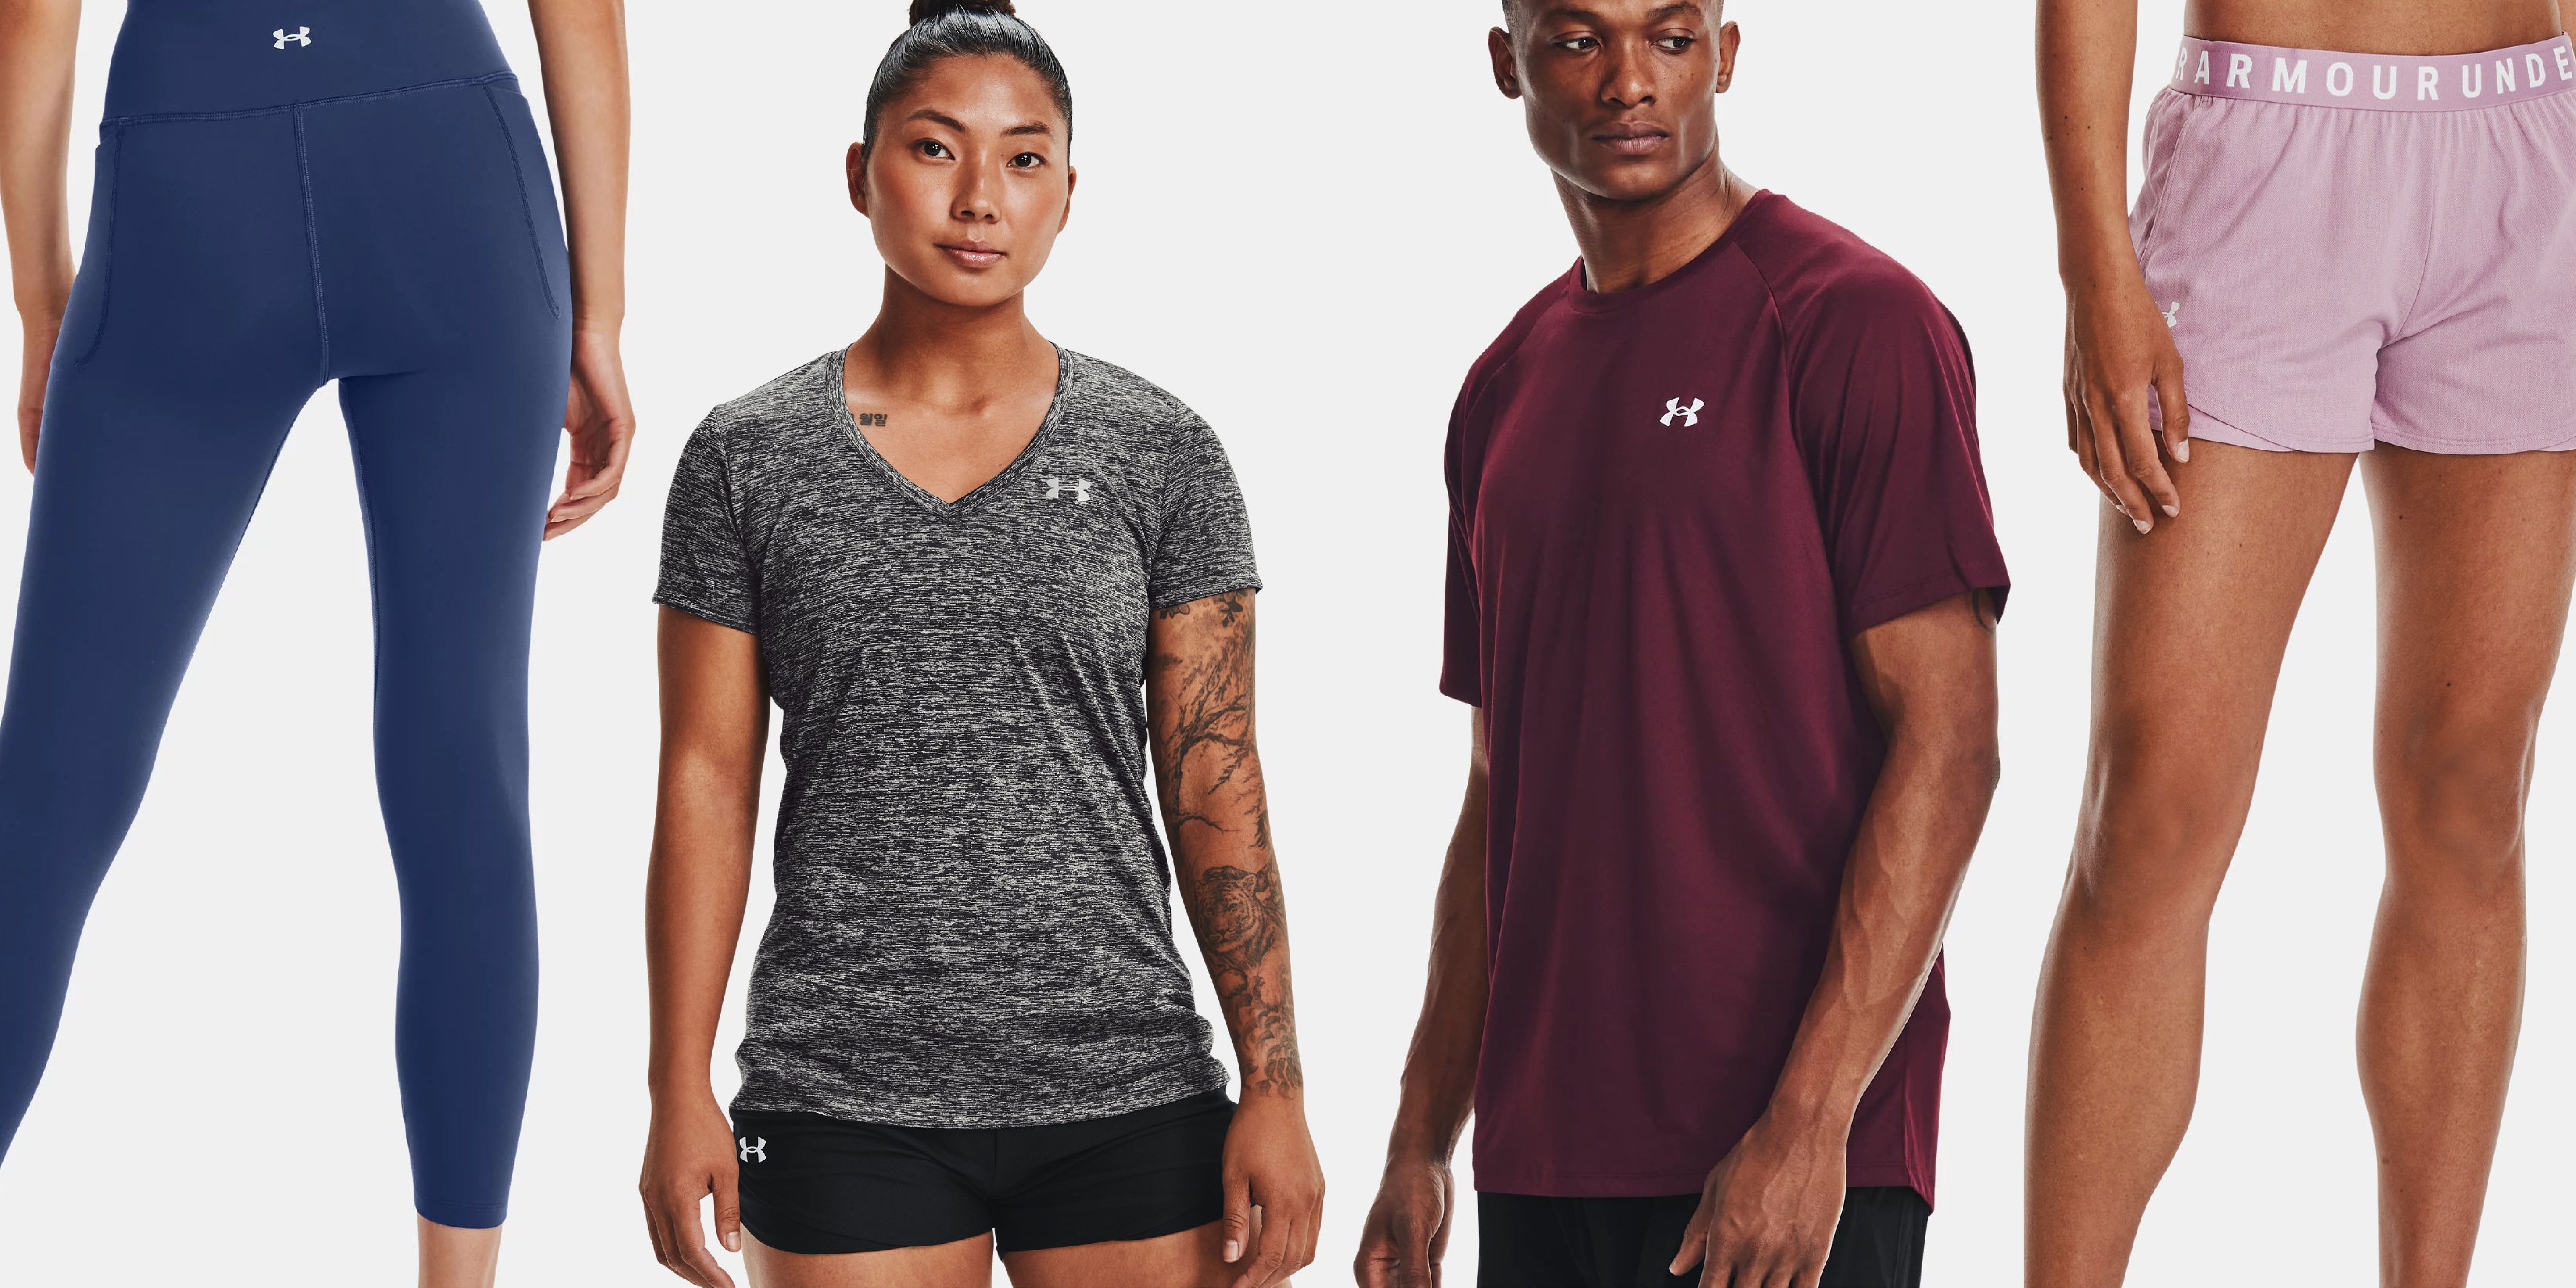 Under Armour Deals: Get Up to 40% Off at Under Armour's Sale